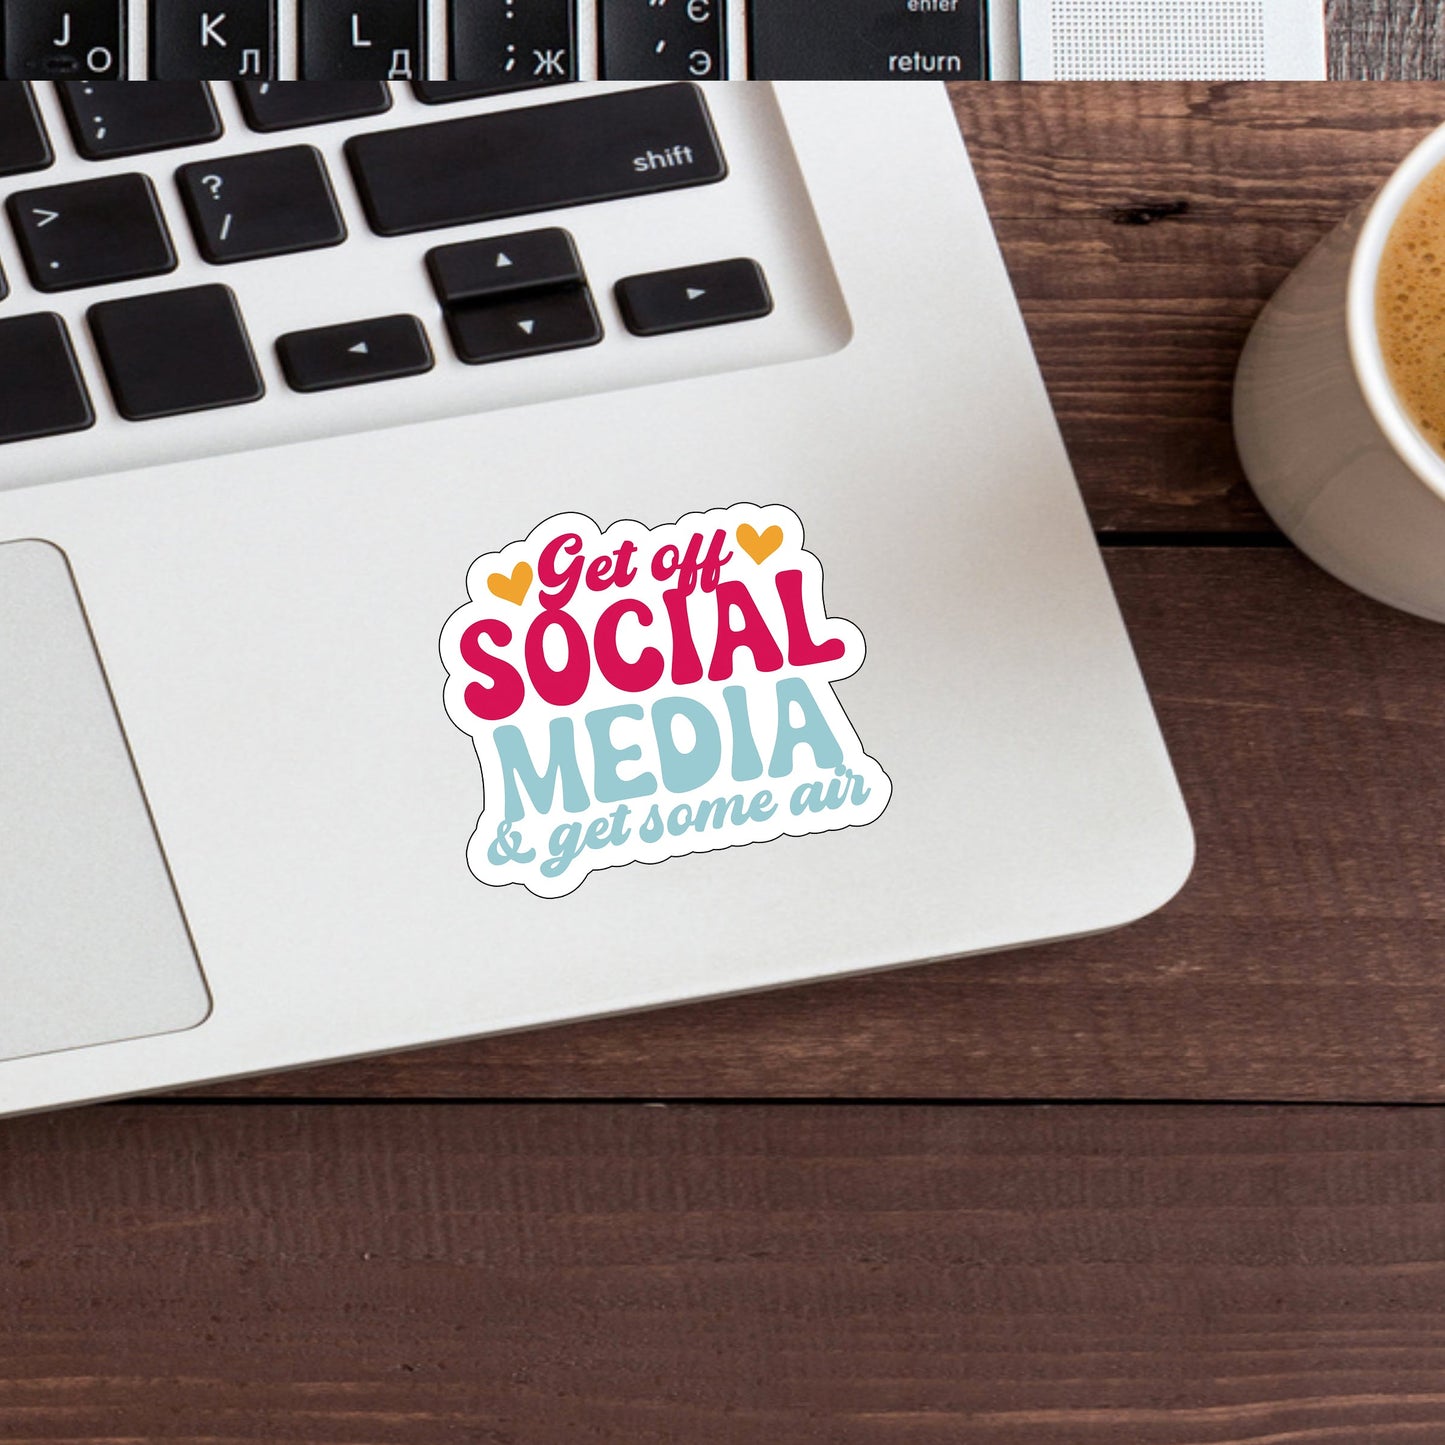 Get off social media and get some air  Sticker,  Vinyl sticker, laptop sticker, Tablet sticker